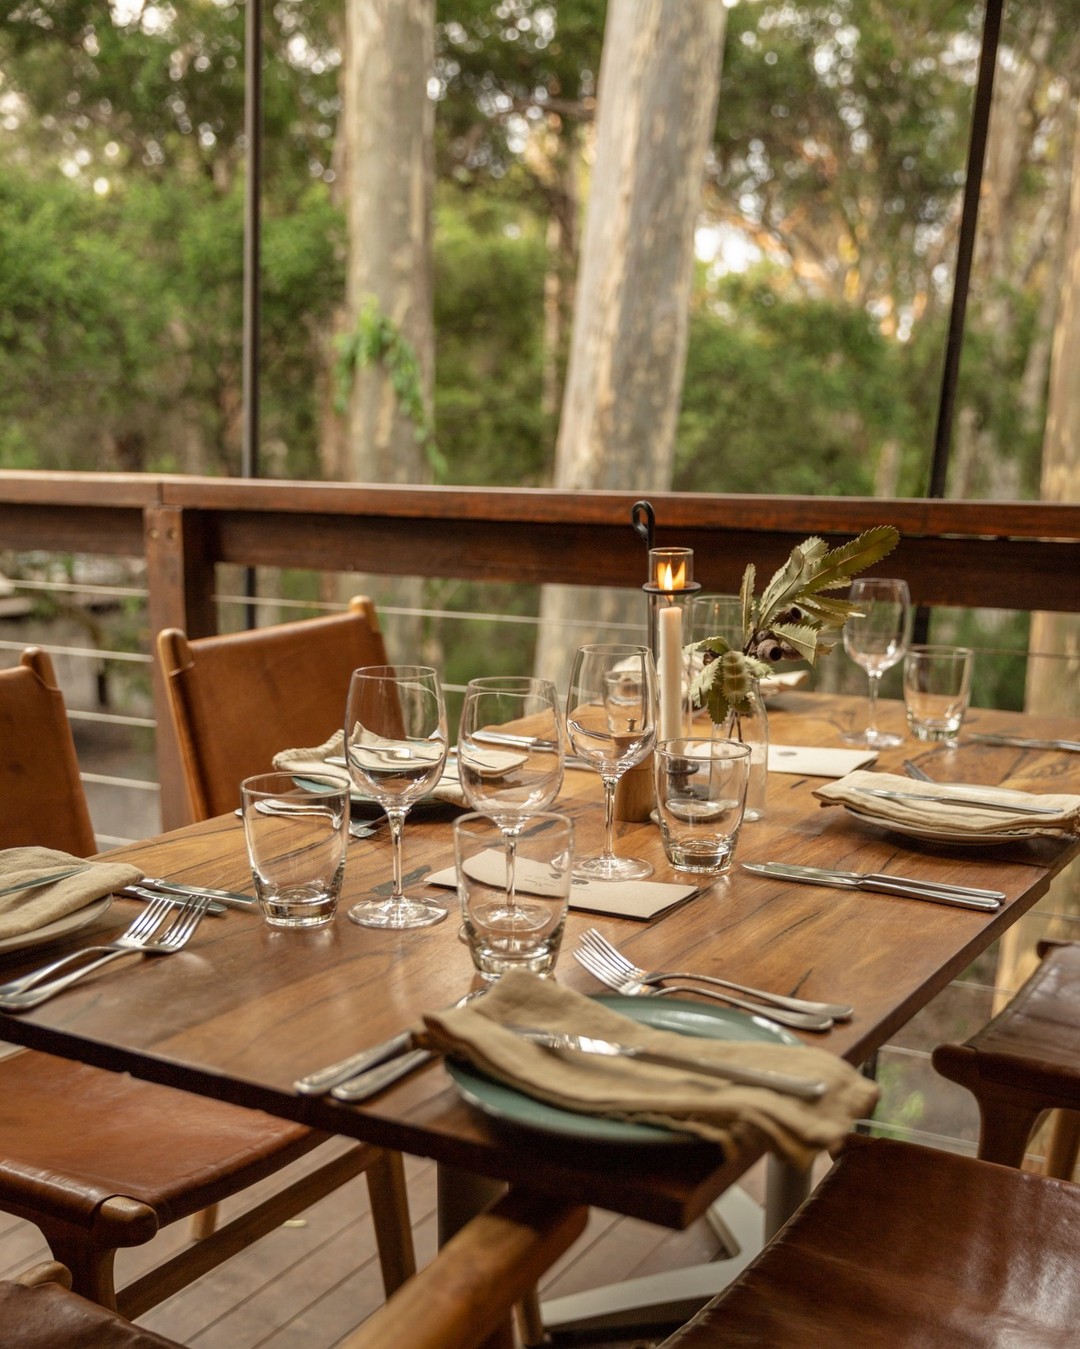 Open verandahs, natural breeze for ventilation and surrounded by tranquil bush... a stay at Paperbark Camp is by its nature a Covid-safe destination. Delicious food and wine amongst the treetops, before wandering under the stars to your own canvas hideaway... 💚
:
:
:
:
:
#visitnsw #seeaustralia #holidayherethisyear #LoveNSW #uniqueboutiquecollection 
#visitshoalhaven #unspoilt #MakeEveryMomentCount #SupportLocal #emptyesky #rejuvenateshoalhaven #discoverjervisbay #jervisbay #glamping #southcoast #staywiththem #bushretreat #jervisbay  #southcoastdreaming #visitsouthcoastnsw